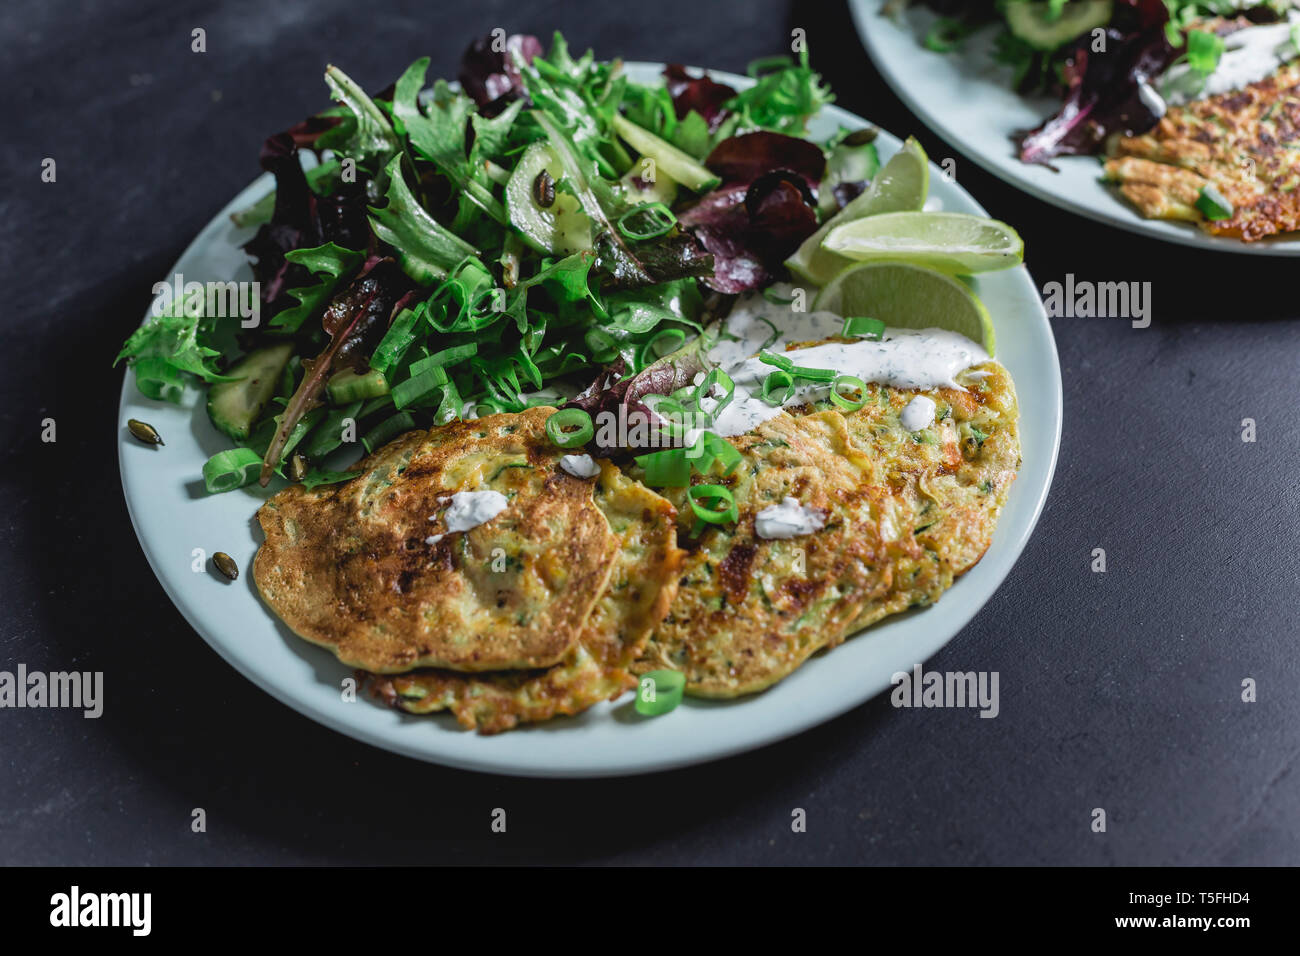 Vegetable cheese fritter with salad on plate Stock Photo